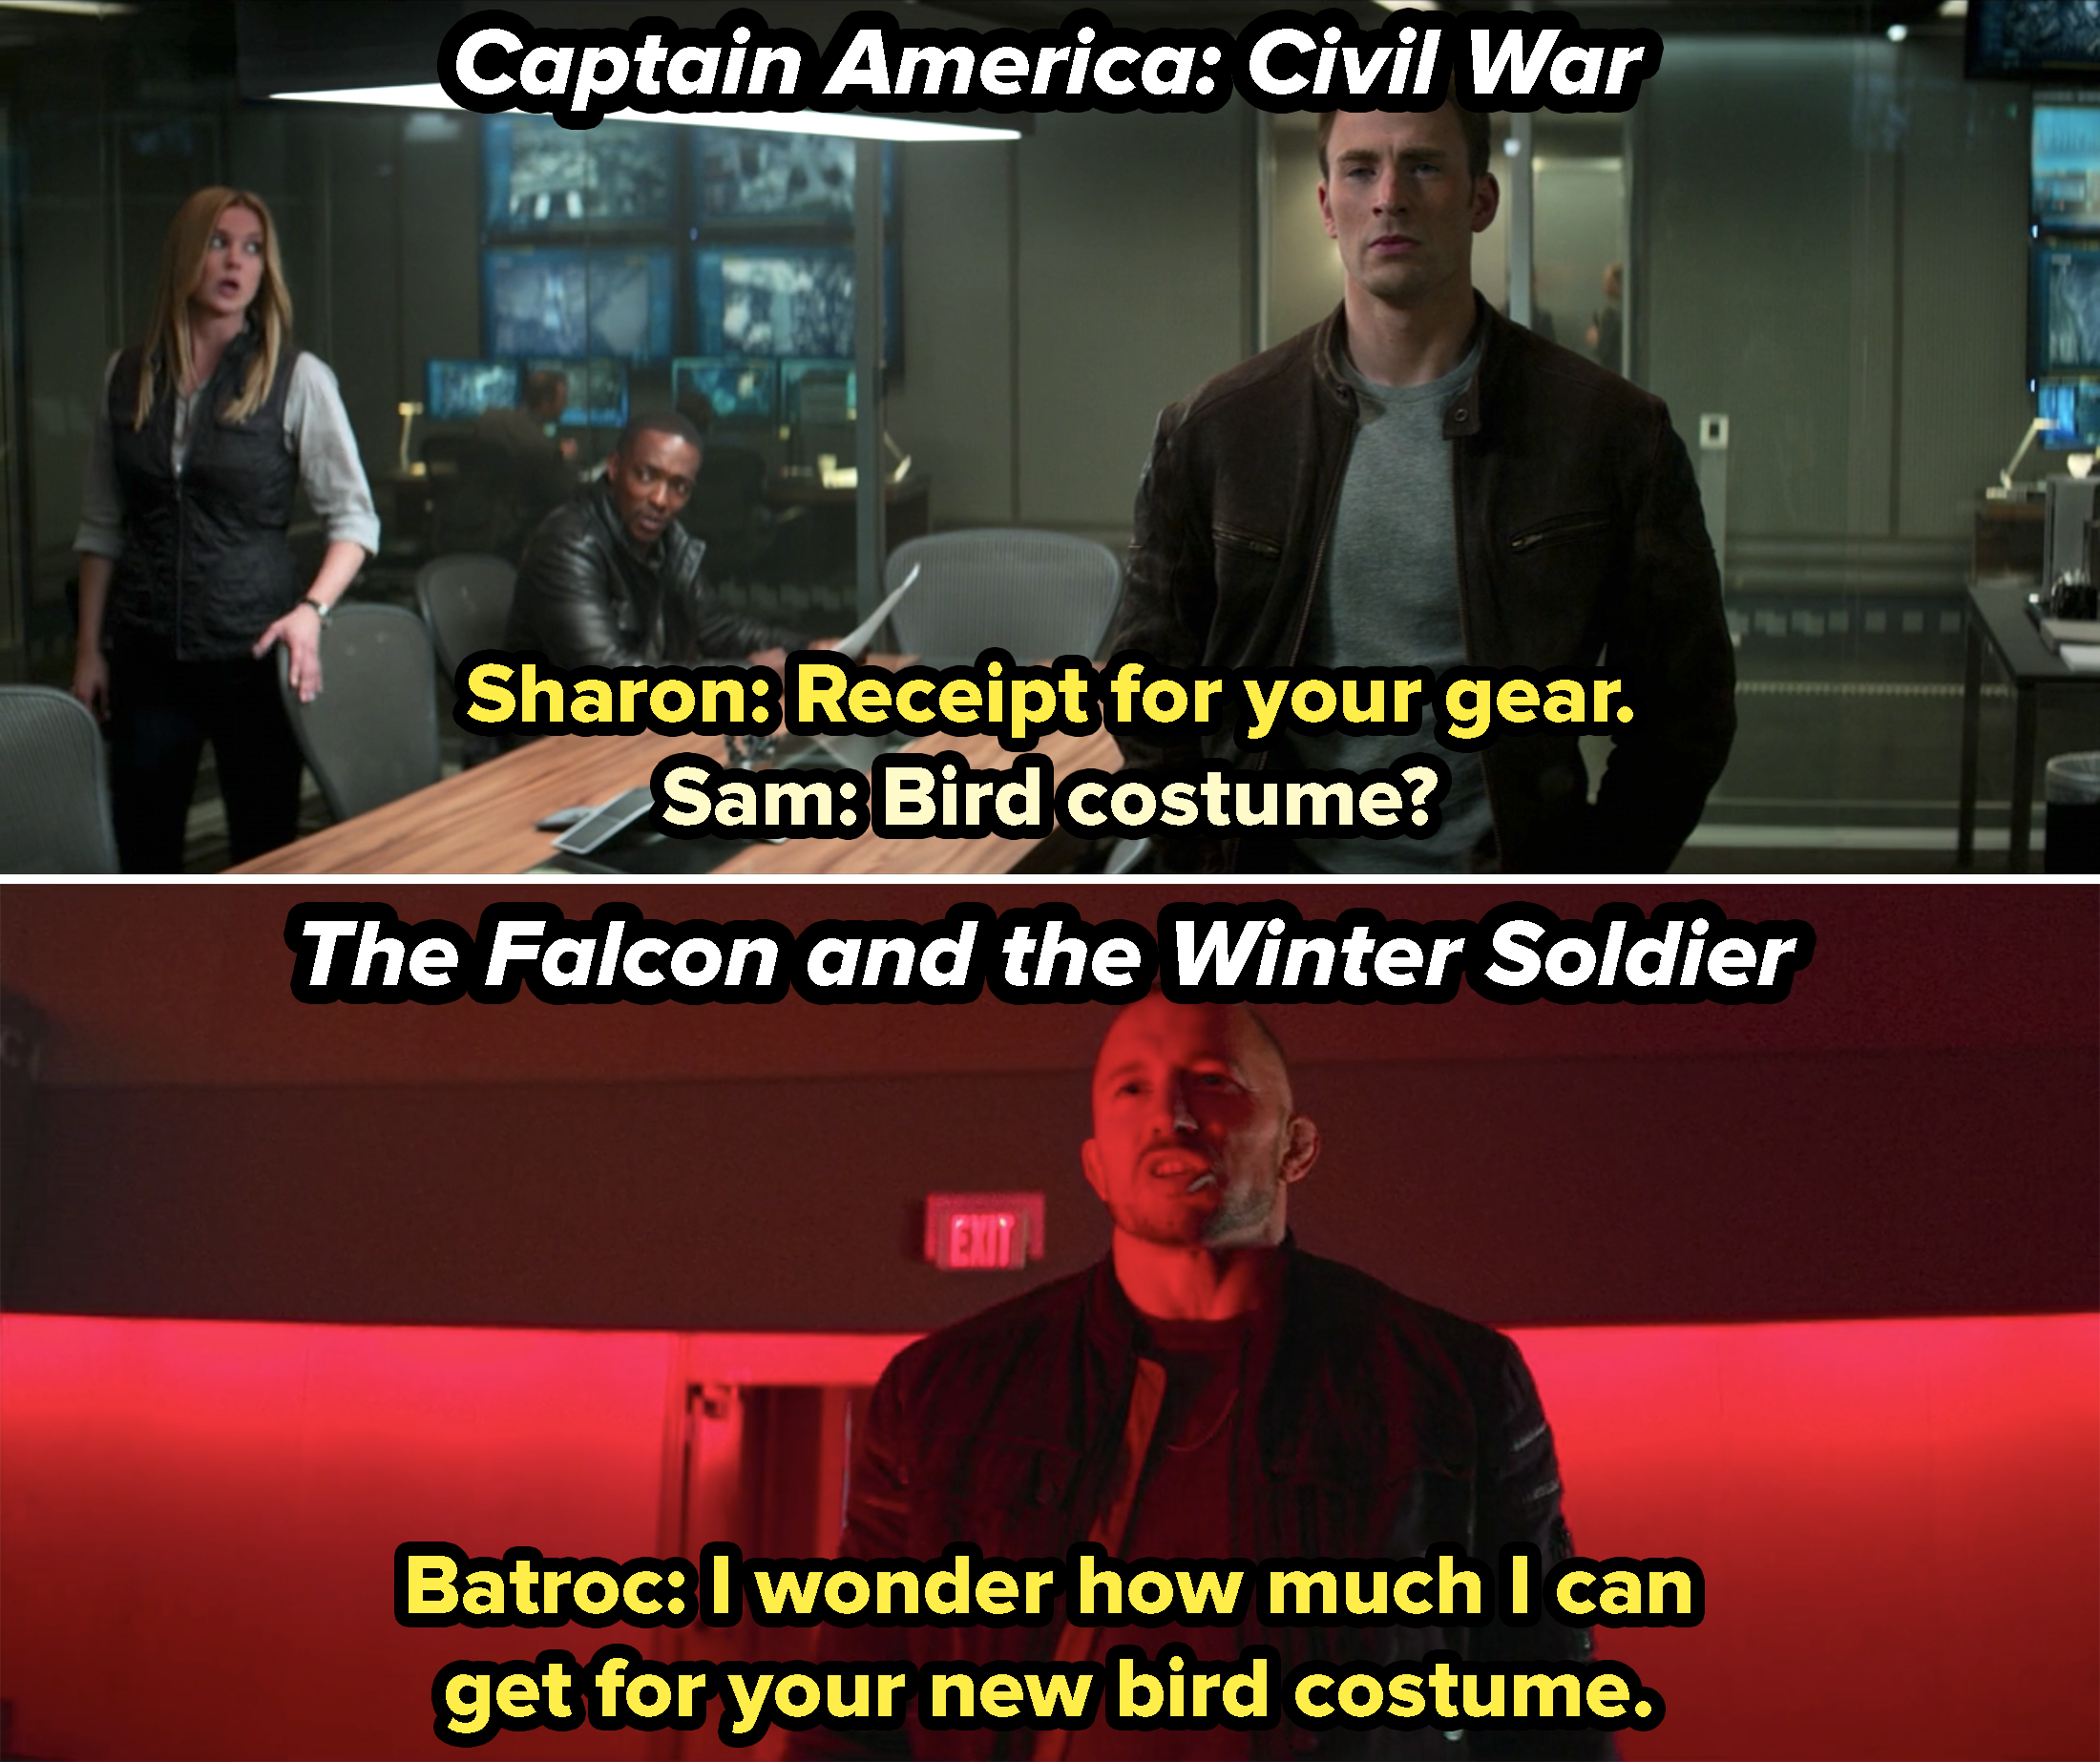 Sam receiving a receipt for his gear that says &quot;bird costume&quot; in Civil War and Batroc saying, &quot;I wonder how much I can get for your new bird costume&quot; in Falcon and the Winter Soldier